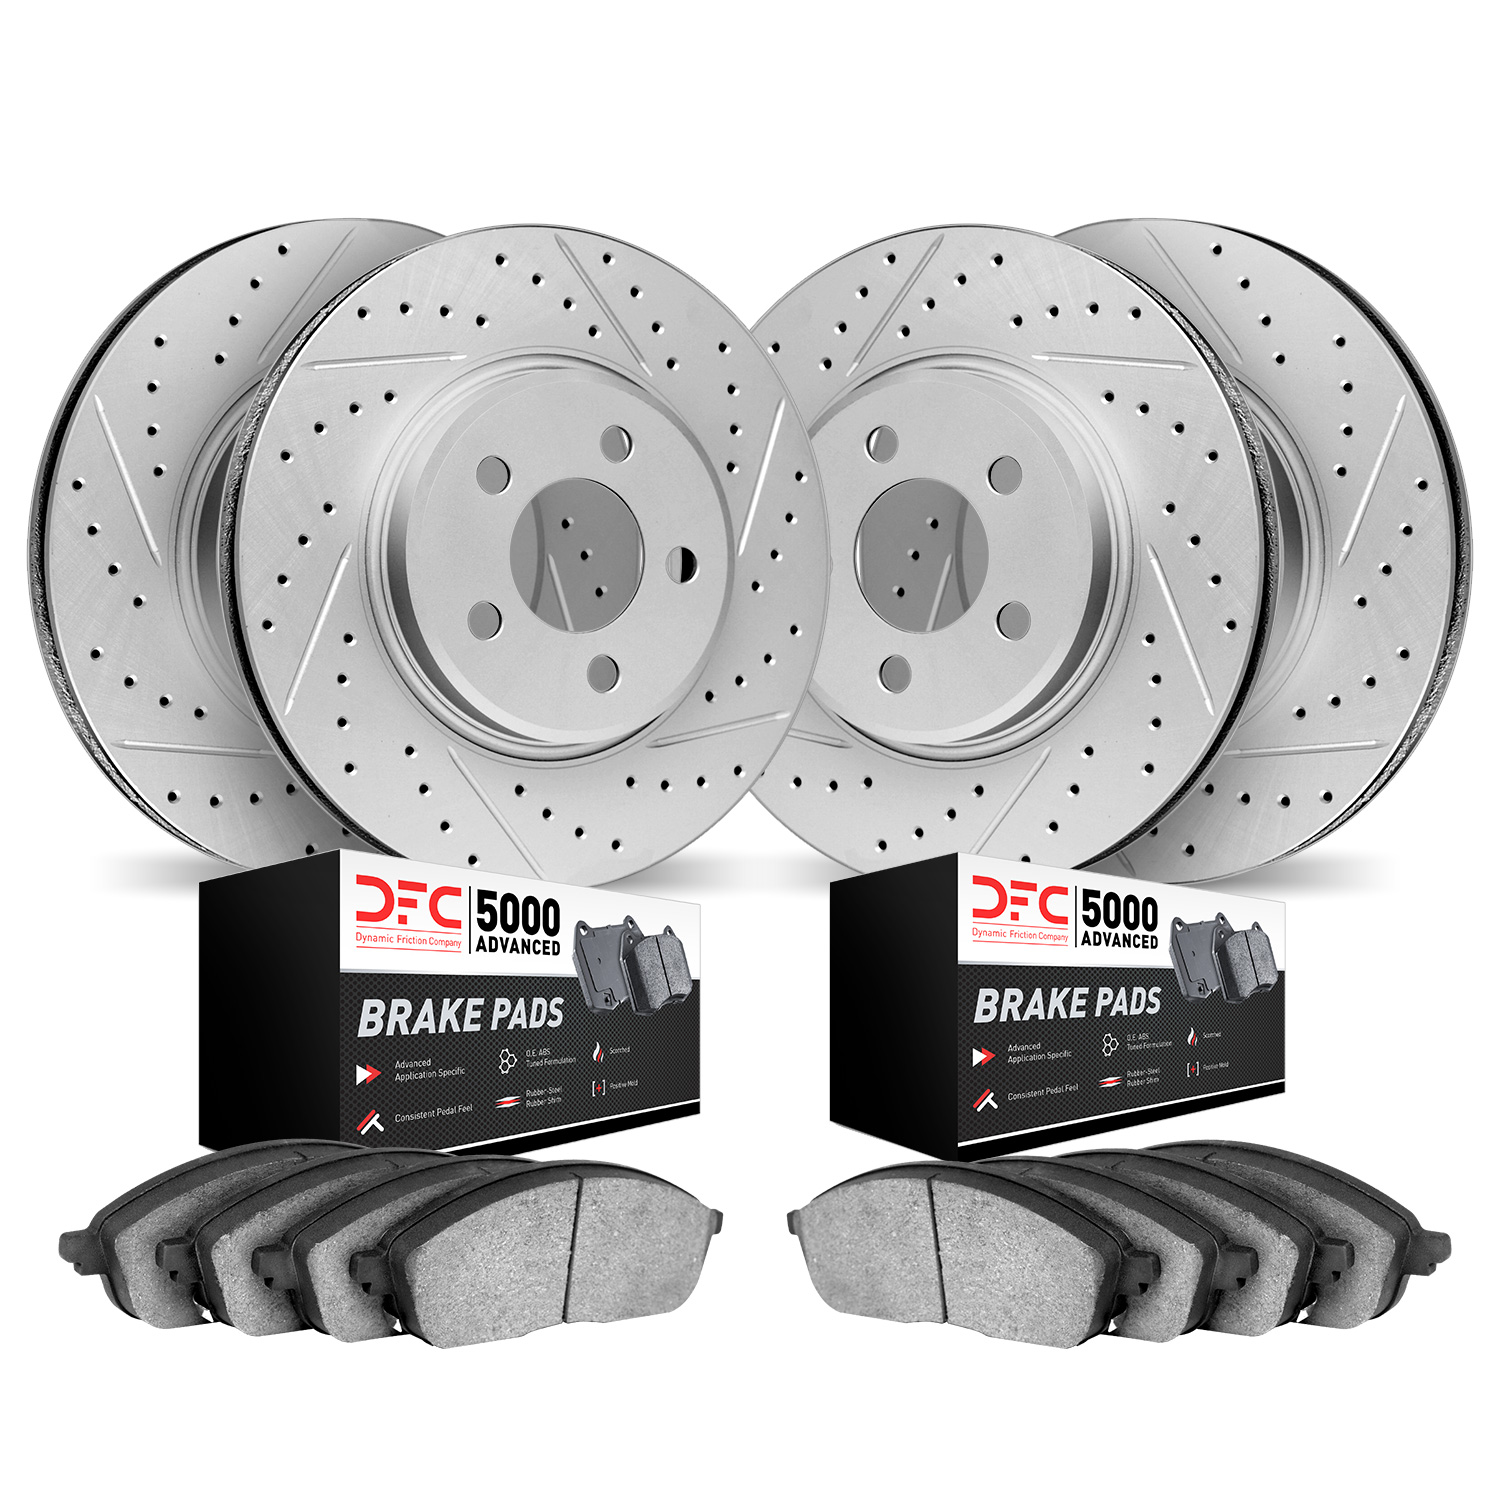 2504-13019 Geoperformance Drilled/Slotted Rotors w/5000 Advanced Brake Pads Kit, Fits Select Subaru, Position: Front and Rear